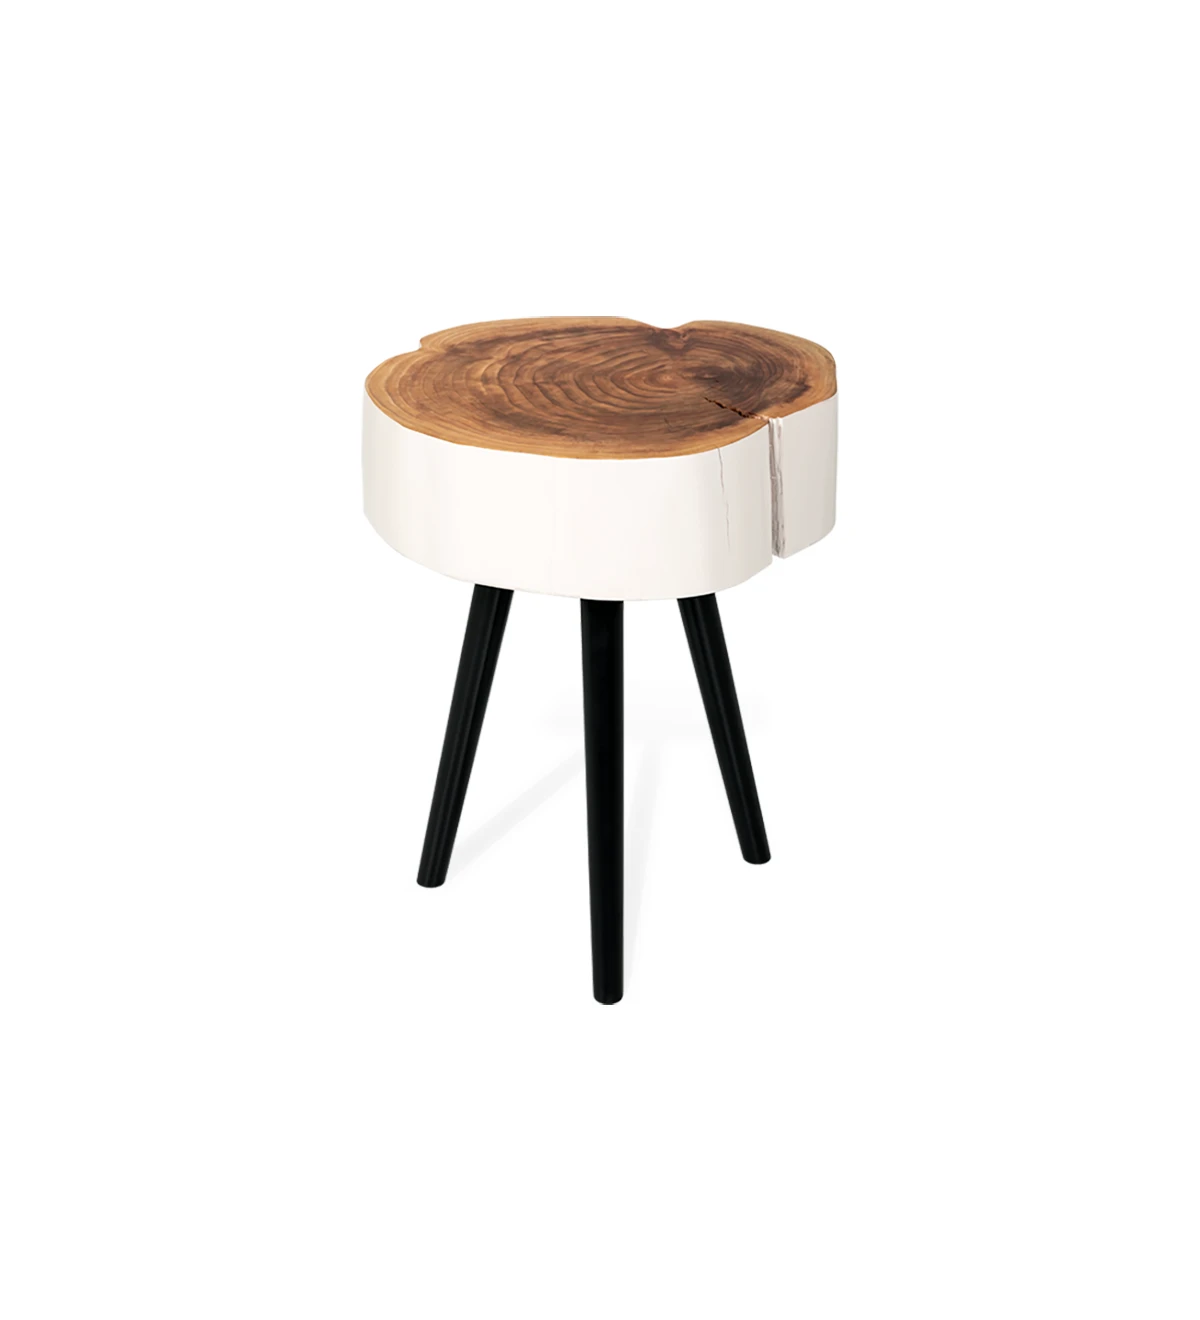 Trunk side table in natural cryptomeria wood lacquered in pearl, black lacquered feet, Ø 35 to 45 cm.